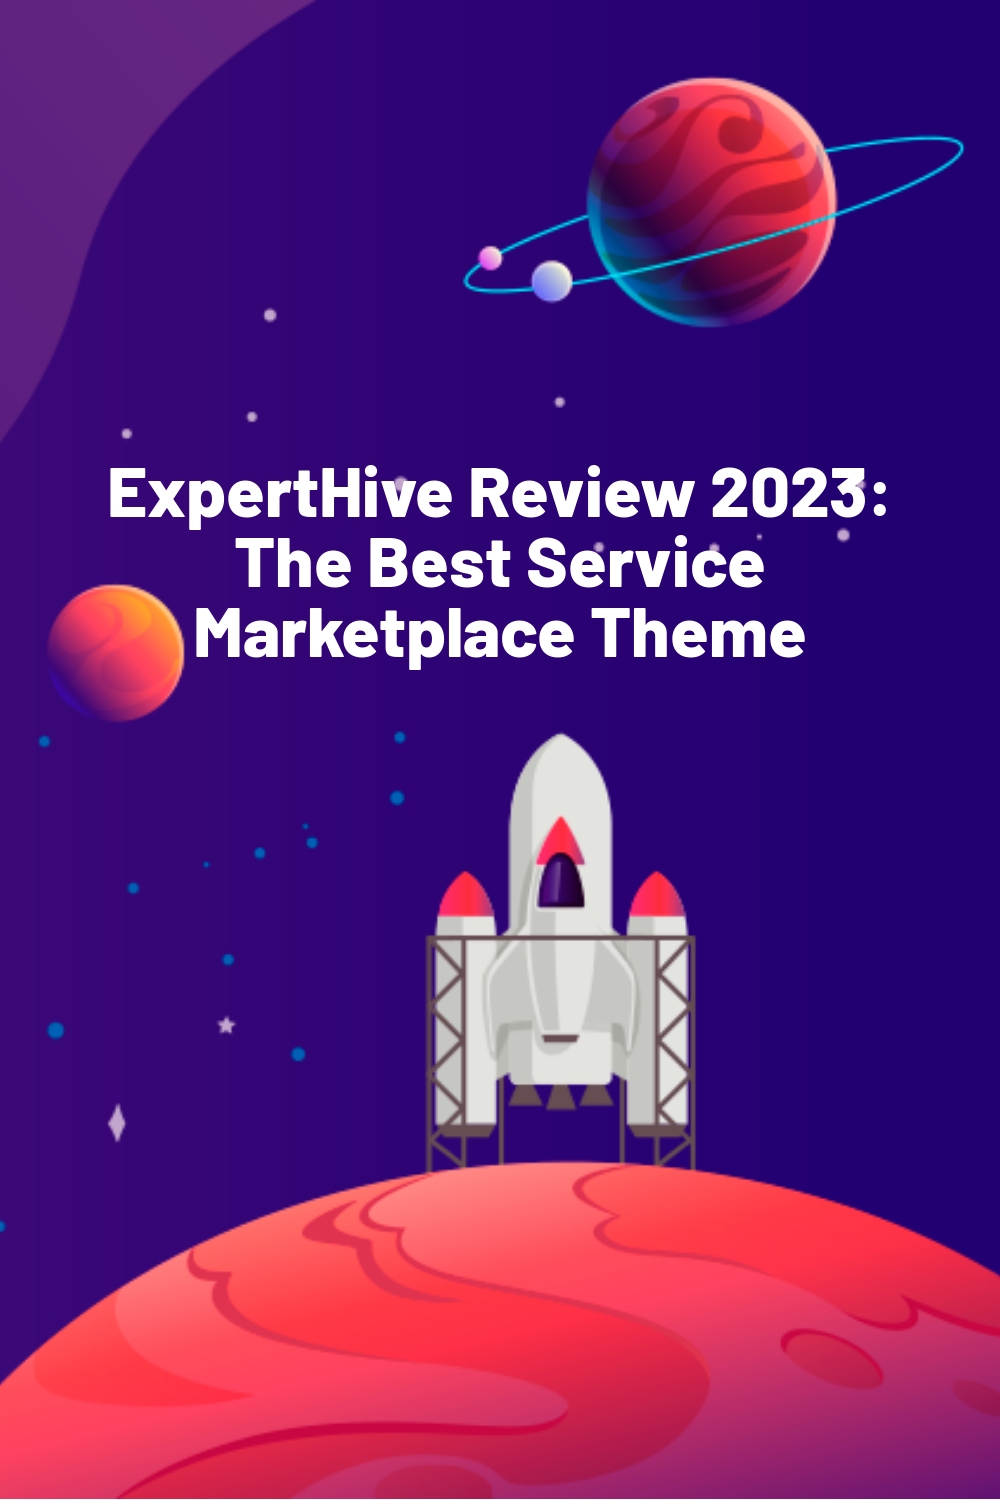 ExpertHive Review 2023: The Best Service Marketplace Theme